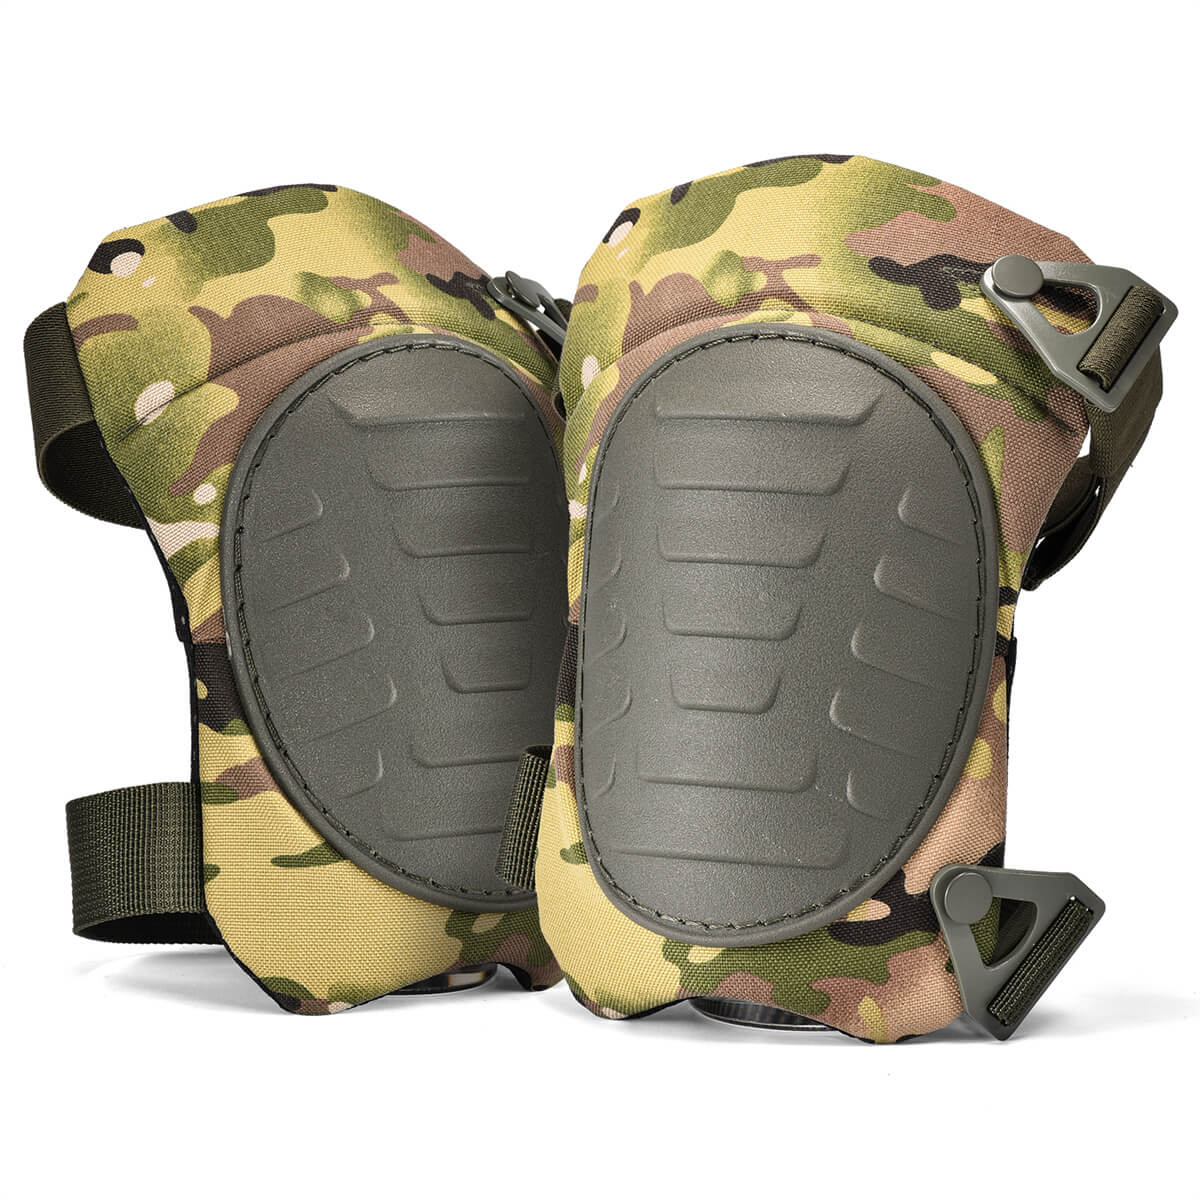 SAFEYEAR Gel Knee Pads for Construction